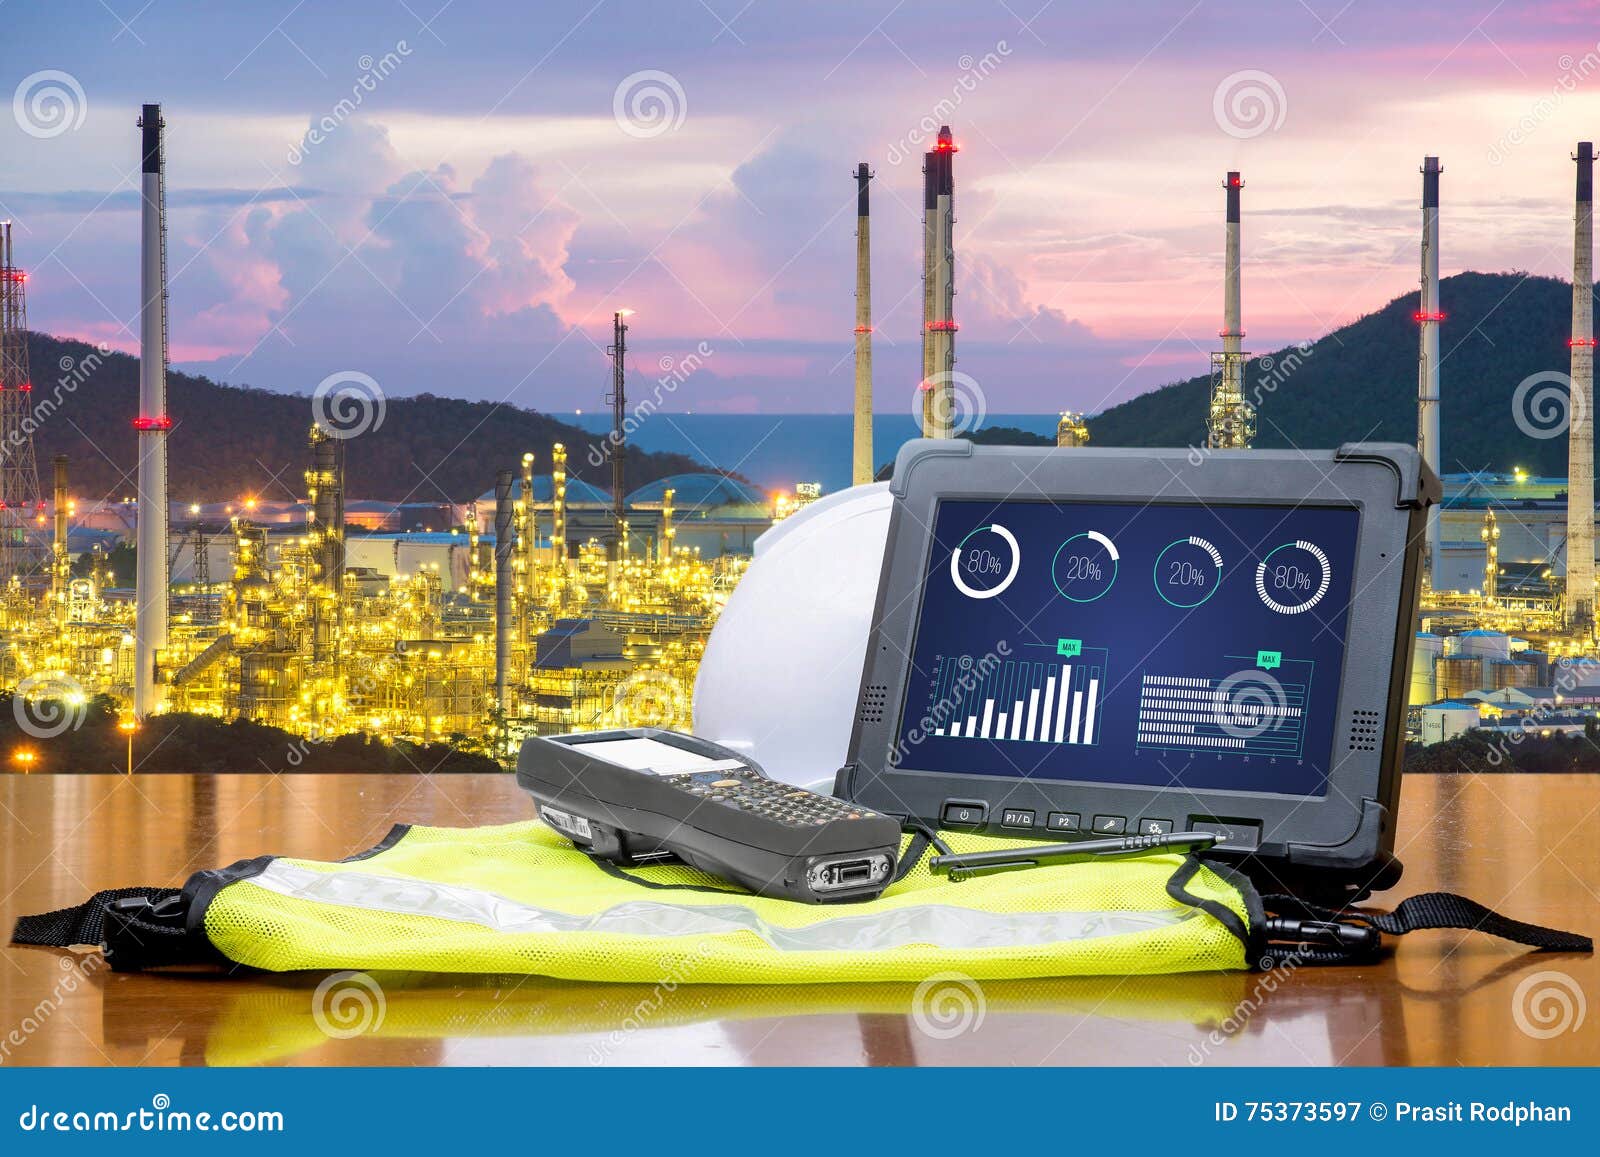 smart factory - rugged computers tablet in front of oil refinery